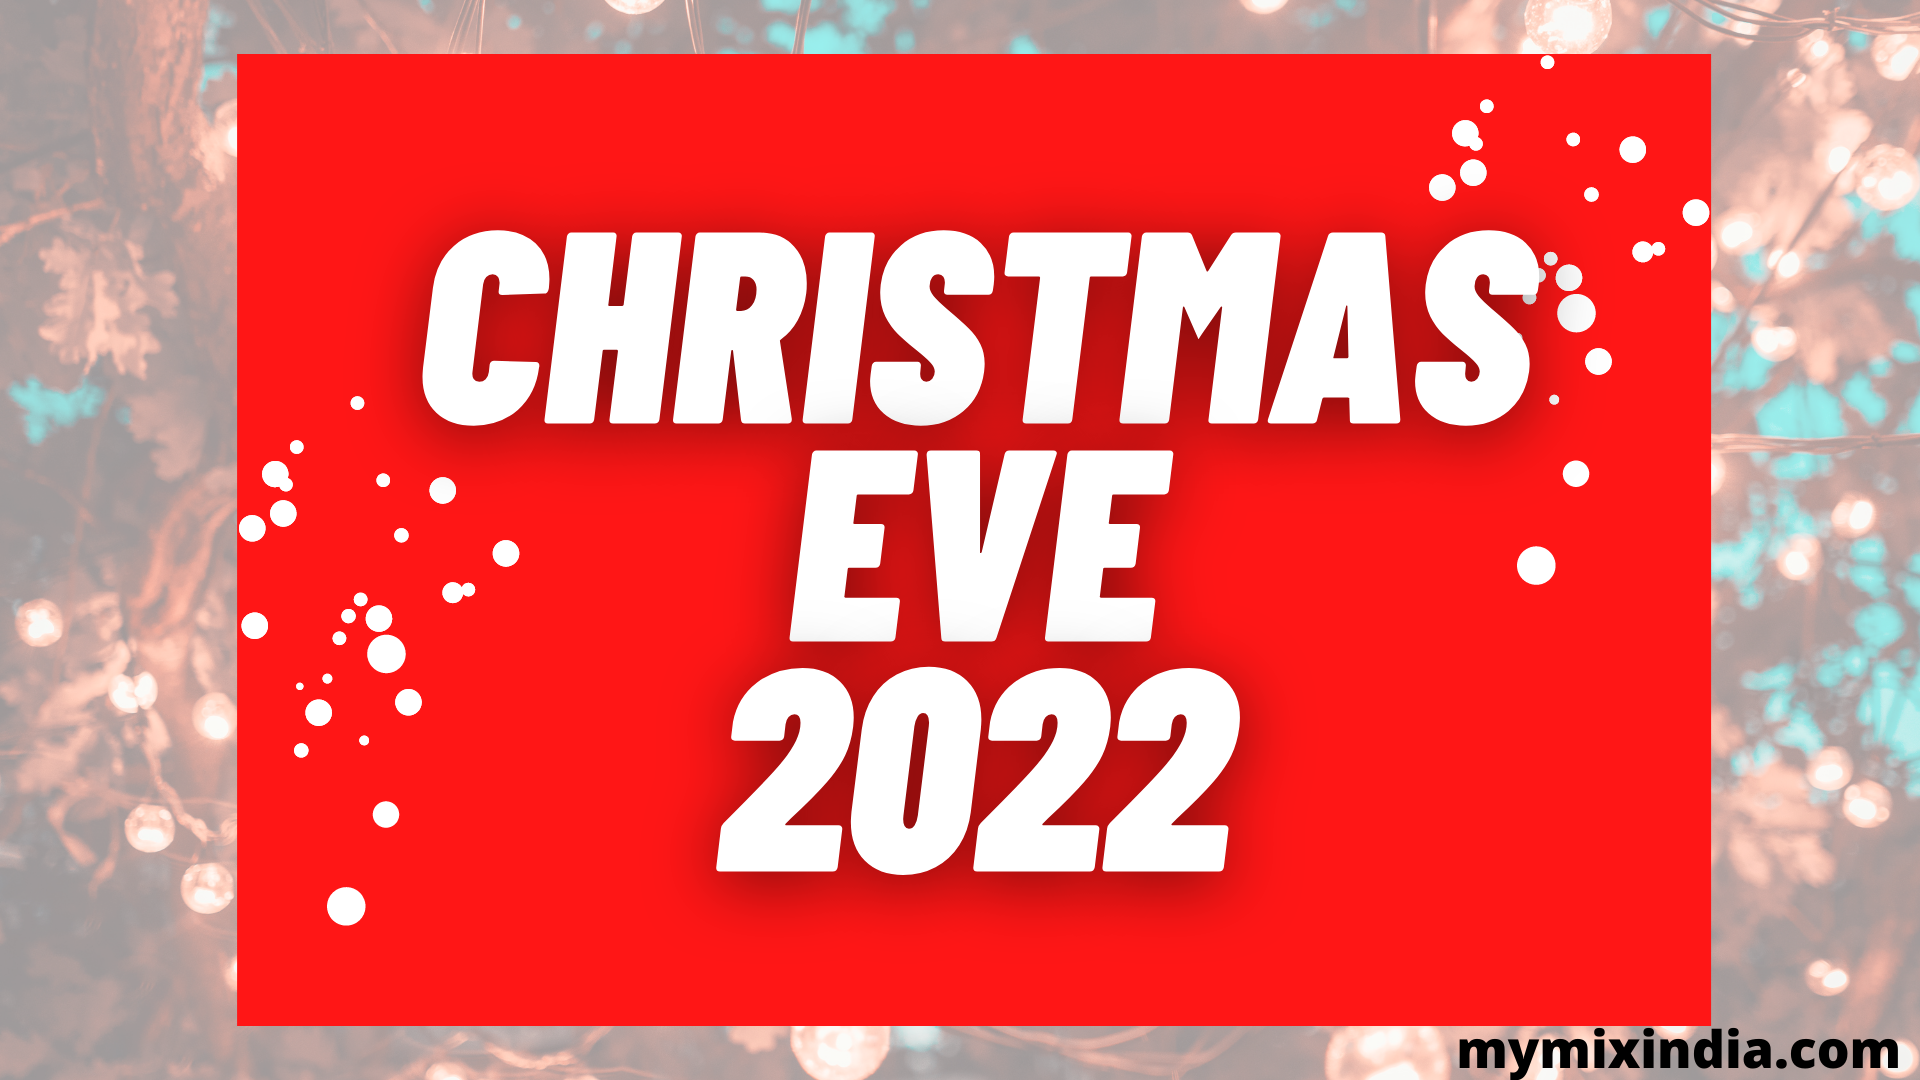 How to Celebrate Christmas Eve 2022 My Mix India